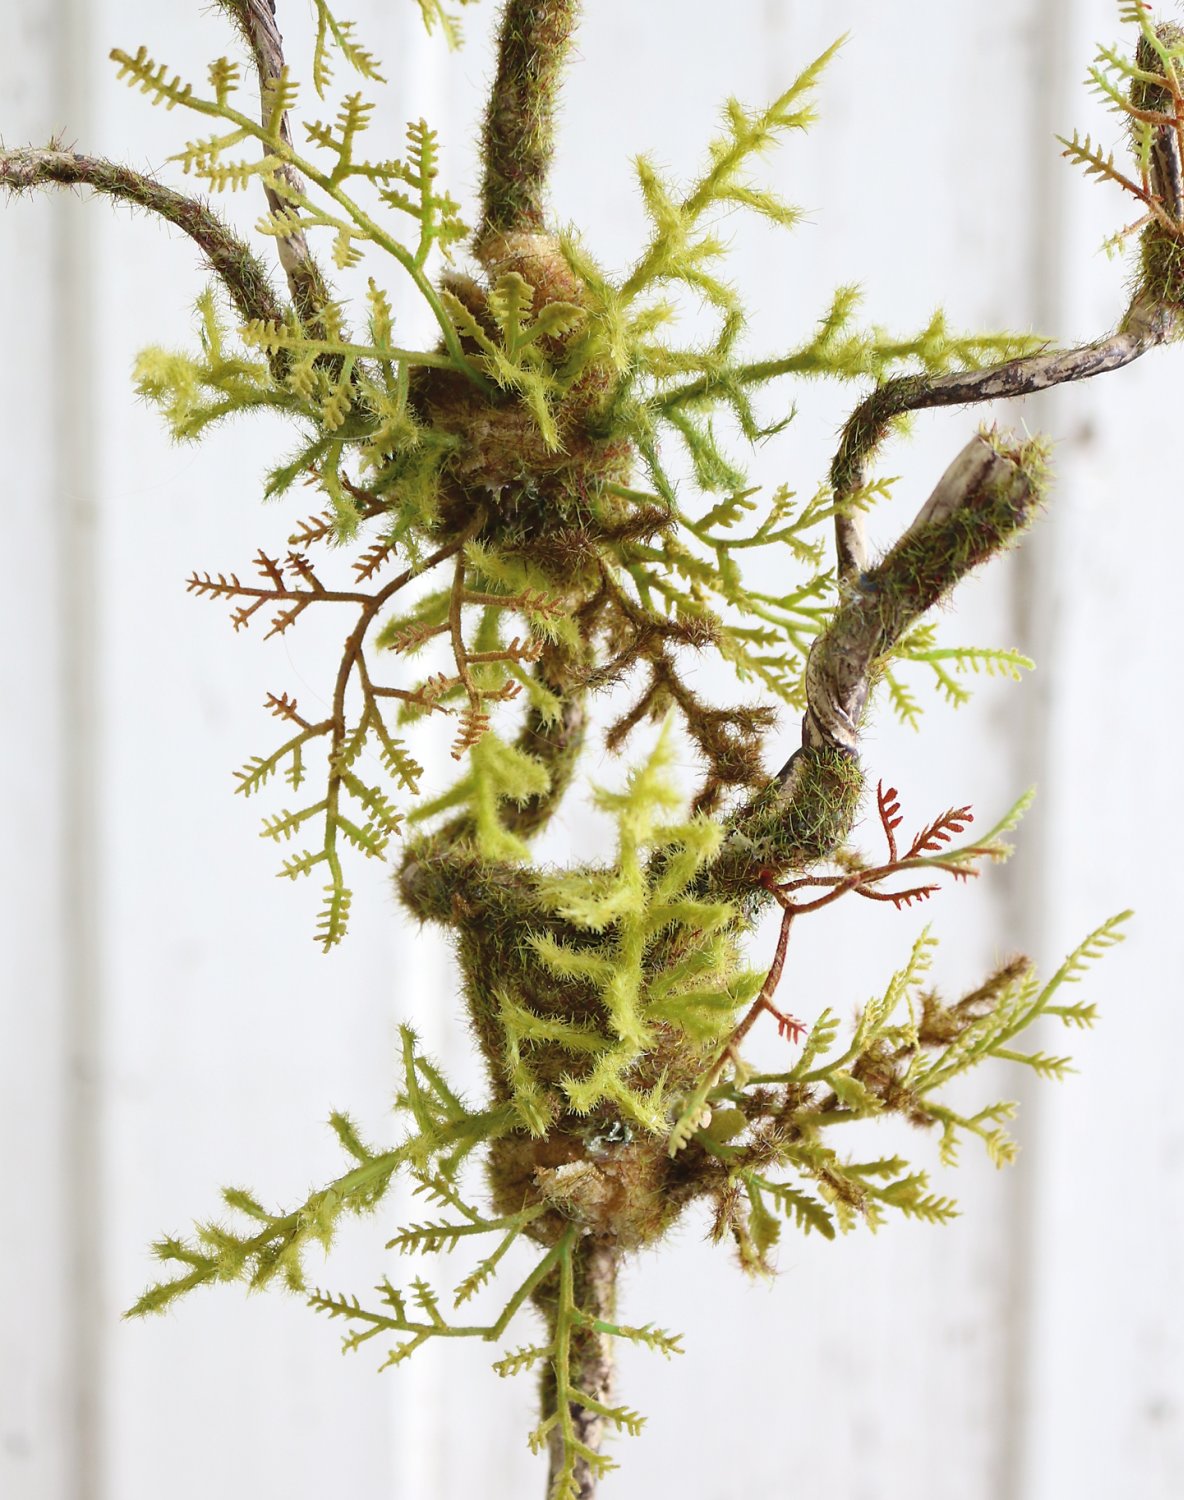 Artificial decorative twig 'curly' with moss & fern, 72 cm, brown-green